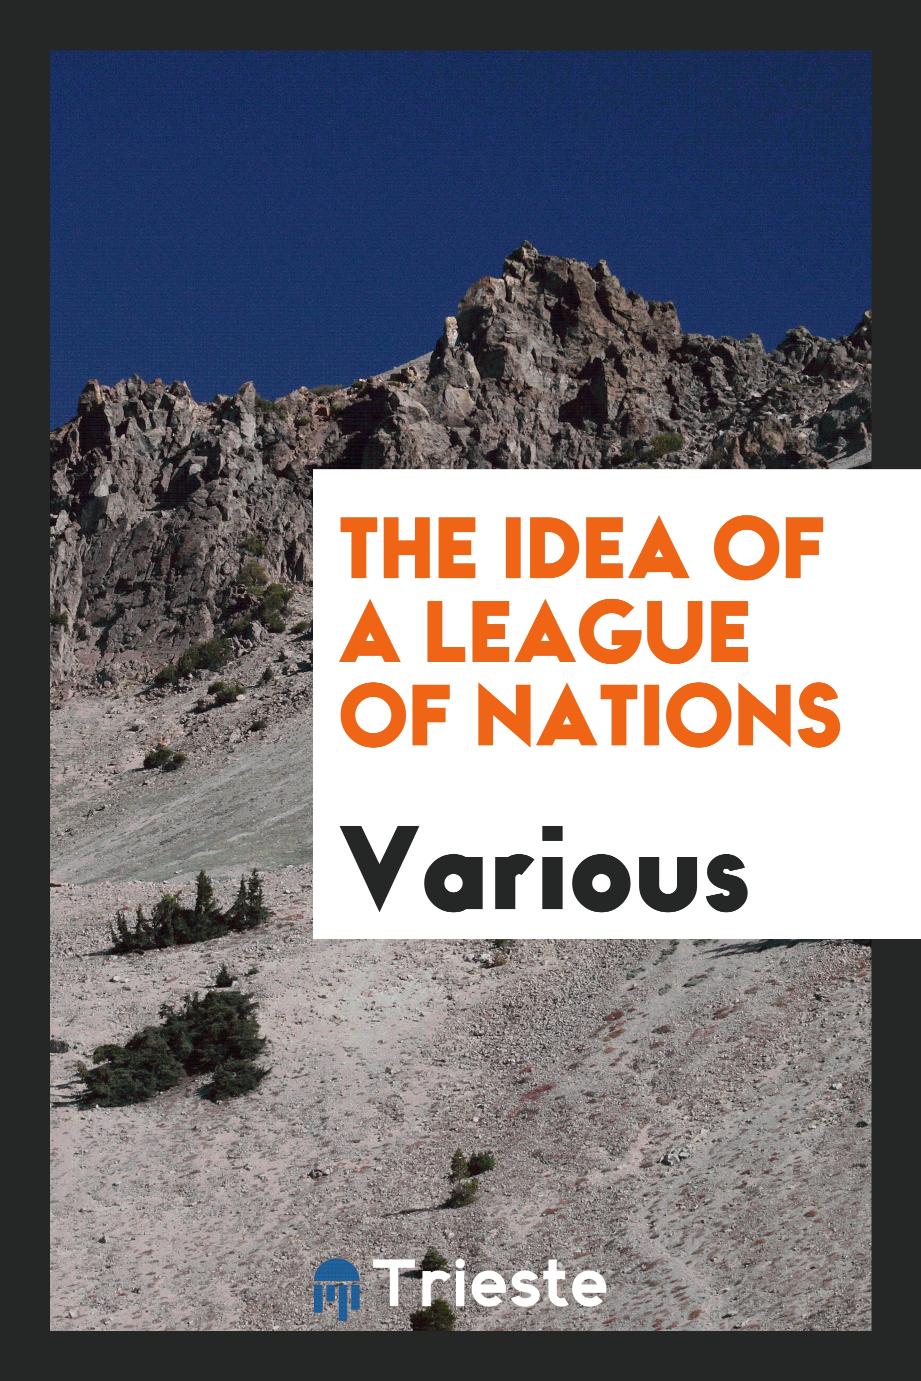 The idea of a League of Nations